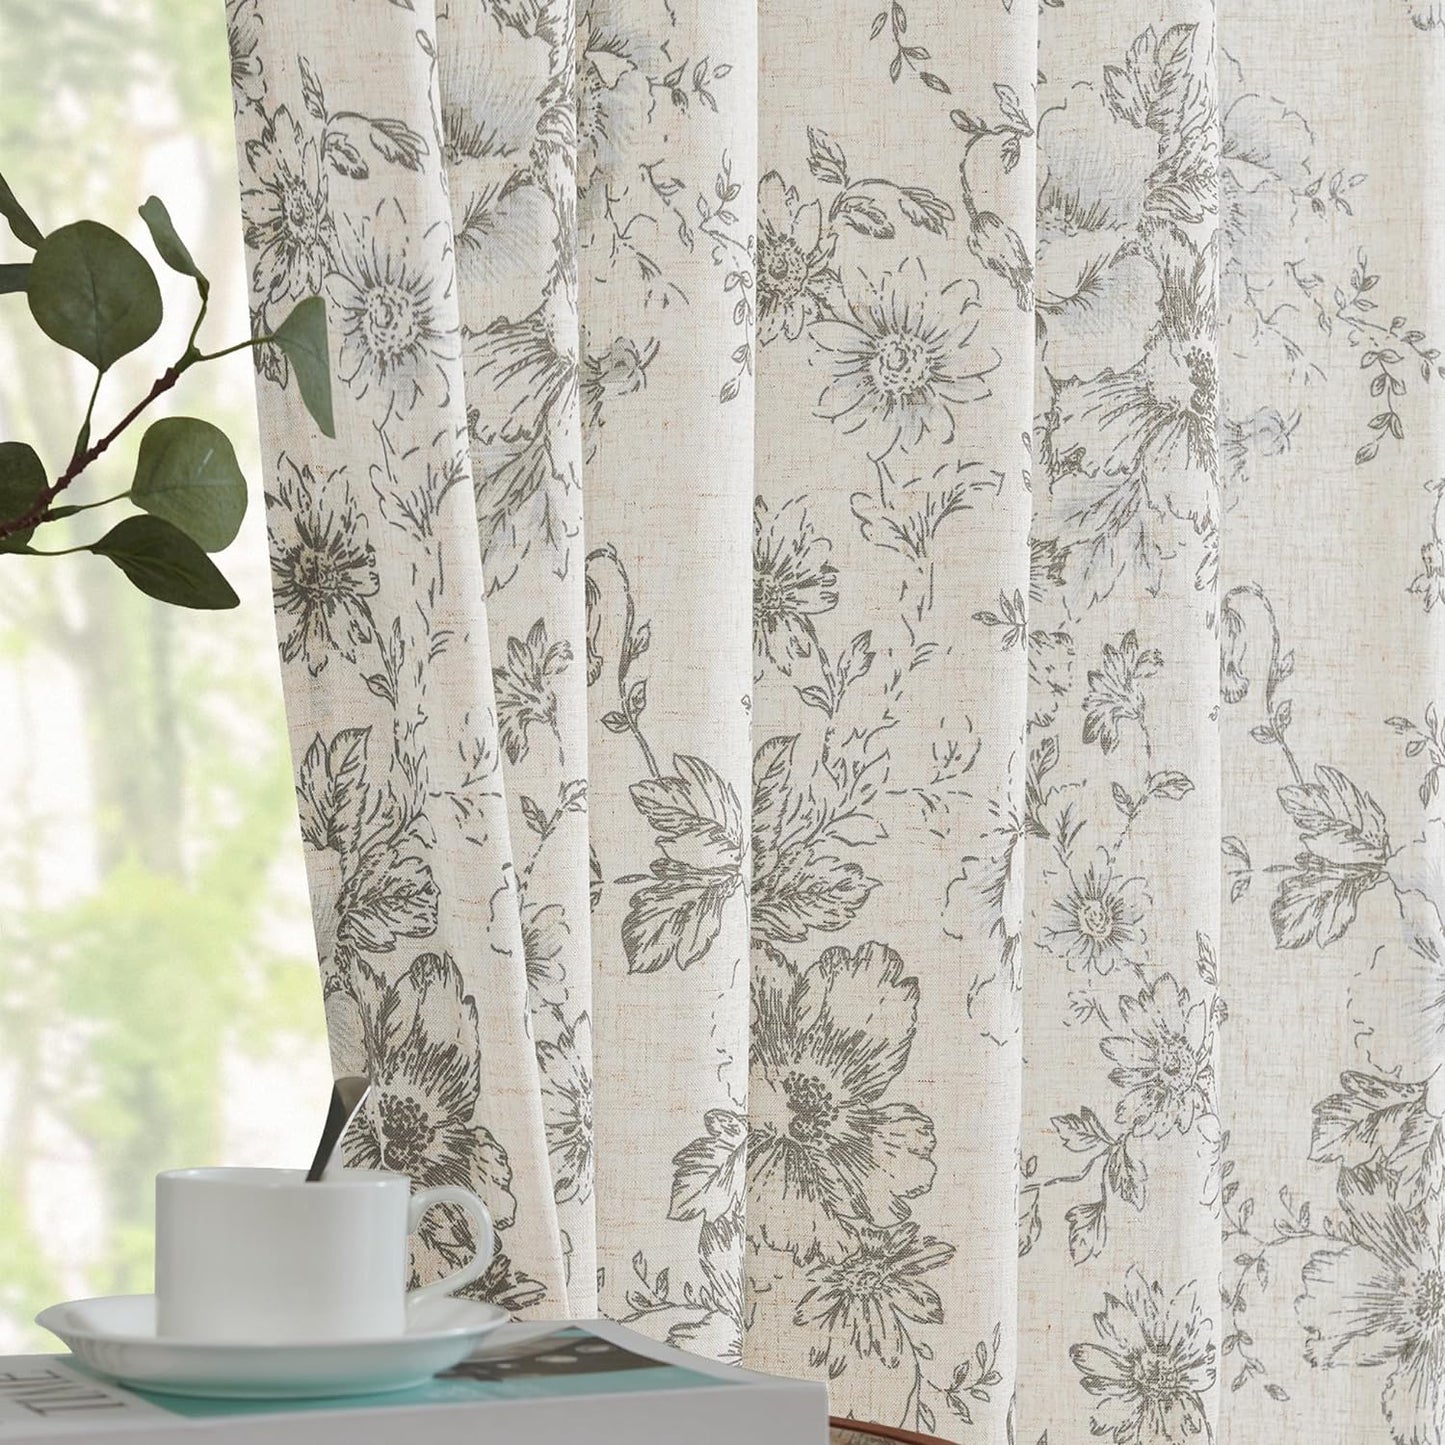 Jinchan Linen Curtains Floral Curtains for Living Room 84 Inch Length Black Printed Curtains Rod Pocket Back Tab Farmhouse Peony Flower Patterned Drapes Bedroom Window Curtain Set 2 Panels  CKNY HOME FASHION Flower Grey 50"W X 90"L 